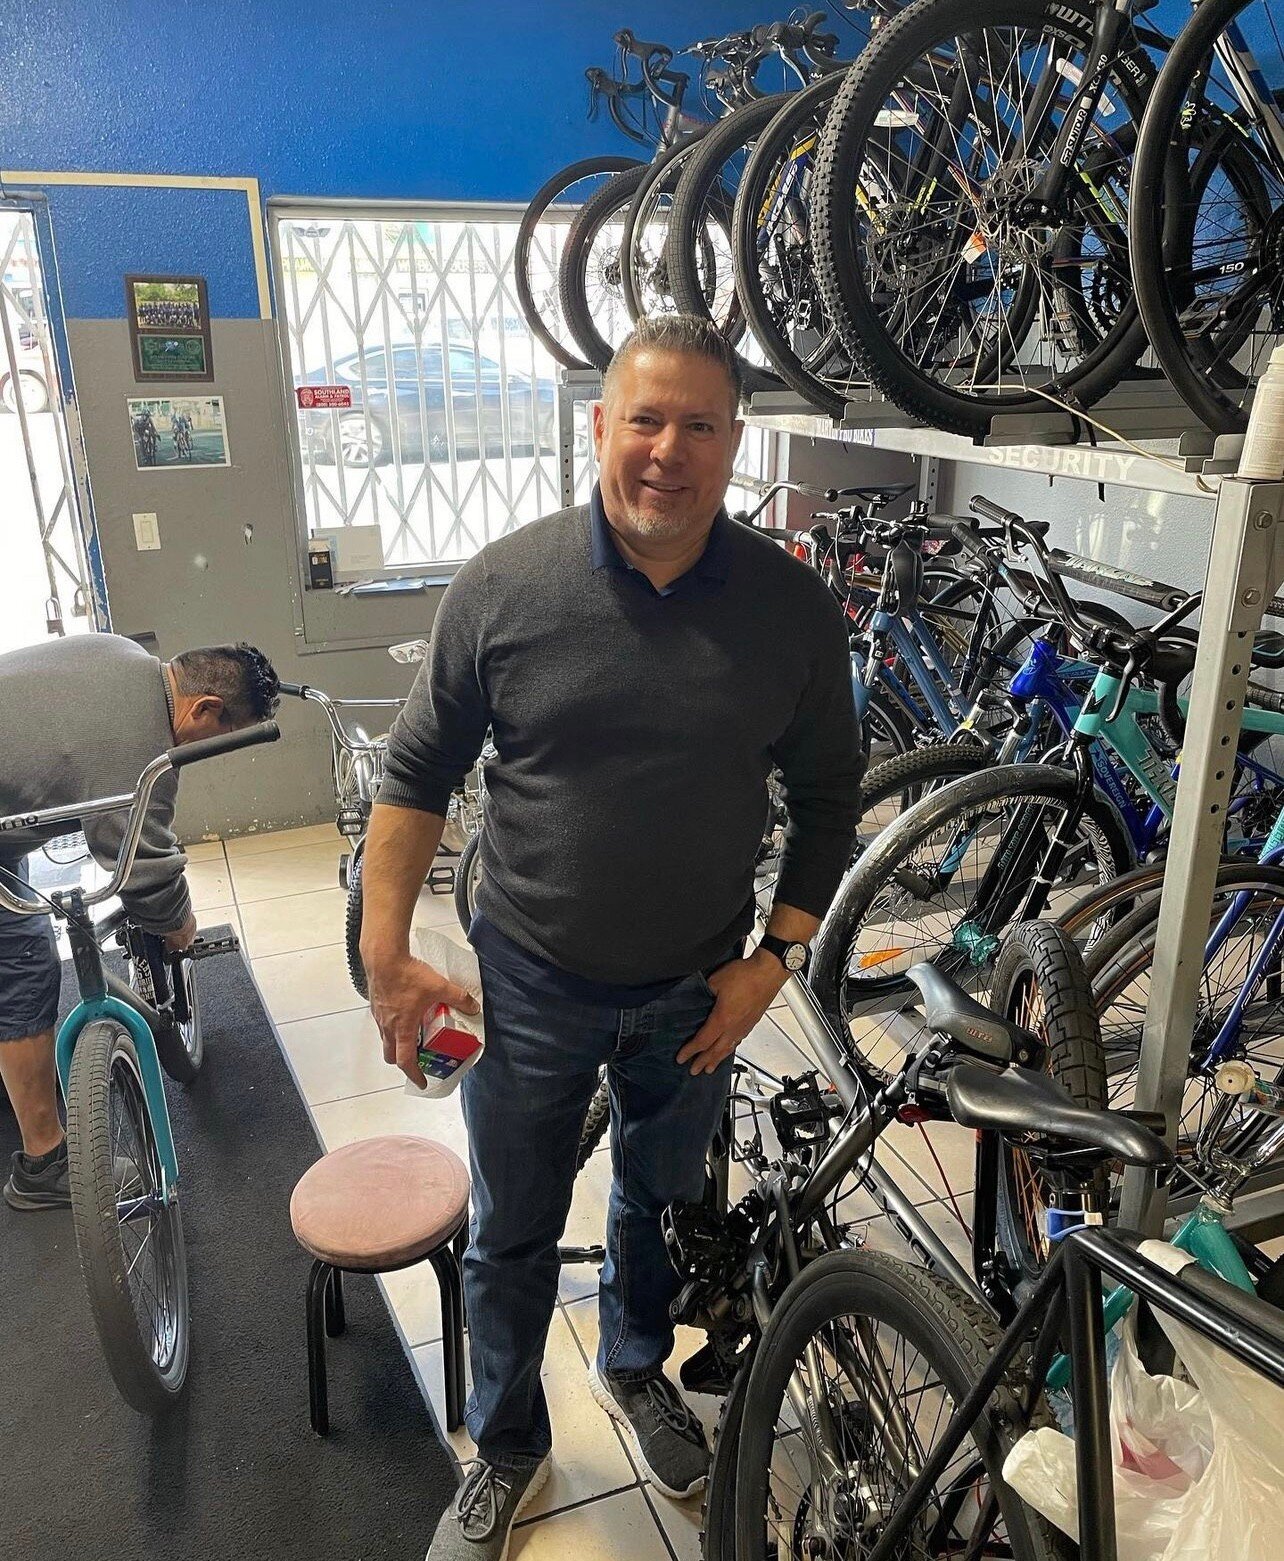 Project Bike Tech is proud to work with bicycle shops across the country! 

Shoutout to Martin, of Martin's Bikes in Los Angeles, for his support of Project Bike Tech at Montebello High School!

Photo: @mhs_project_bike_tech